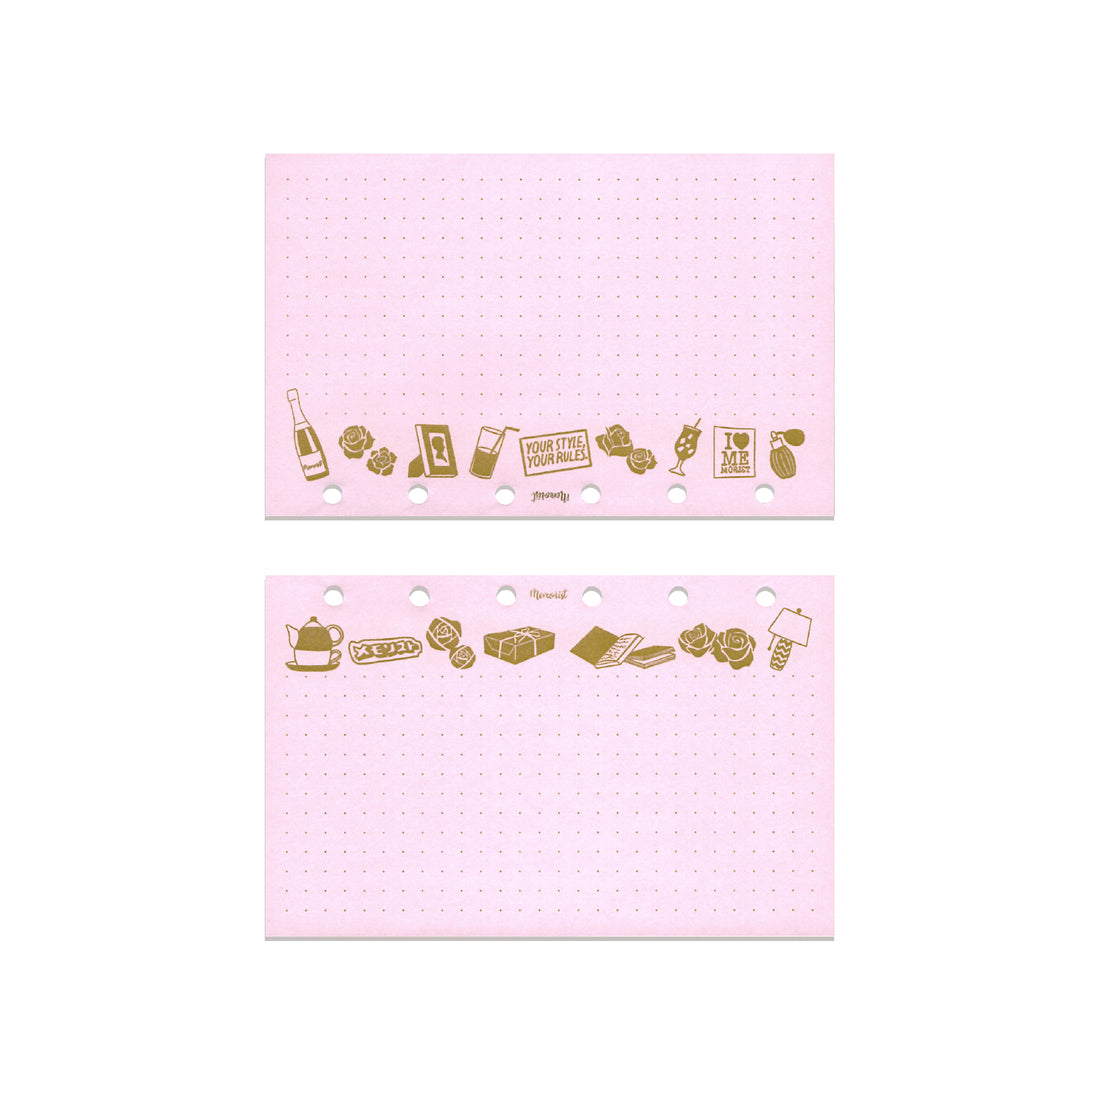 Dotted-Grid Color Sideway Refill【Pink x Pink】(Pocket Size)